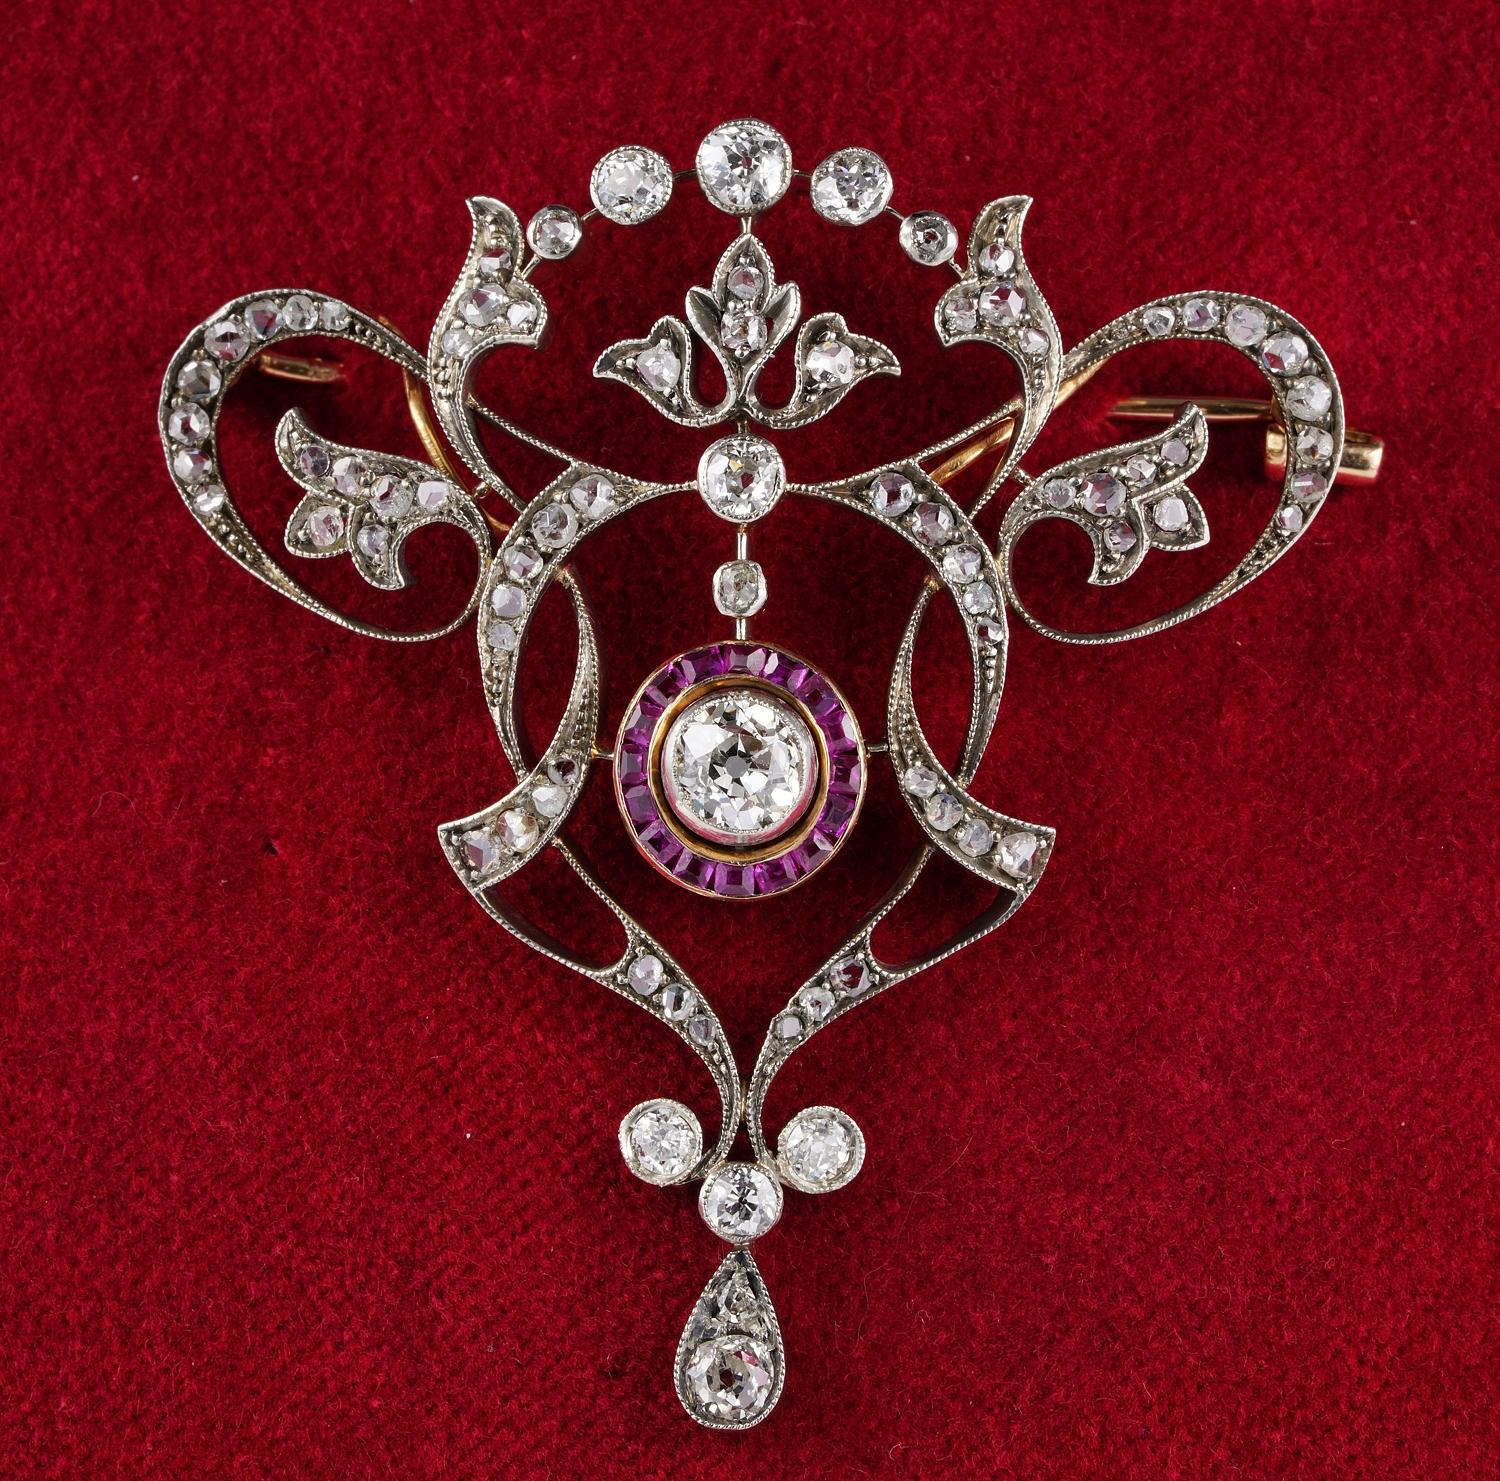 Understated Beautiful Era

Edwardian jewellery is one of the most rewarded jewellery era for its never-ending elegance and complex creative crafting
This ravishing lavaliere pendant brooch is an exemplary from the Belle Epoque era, a triumph of